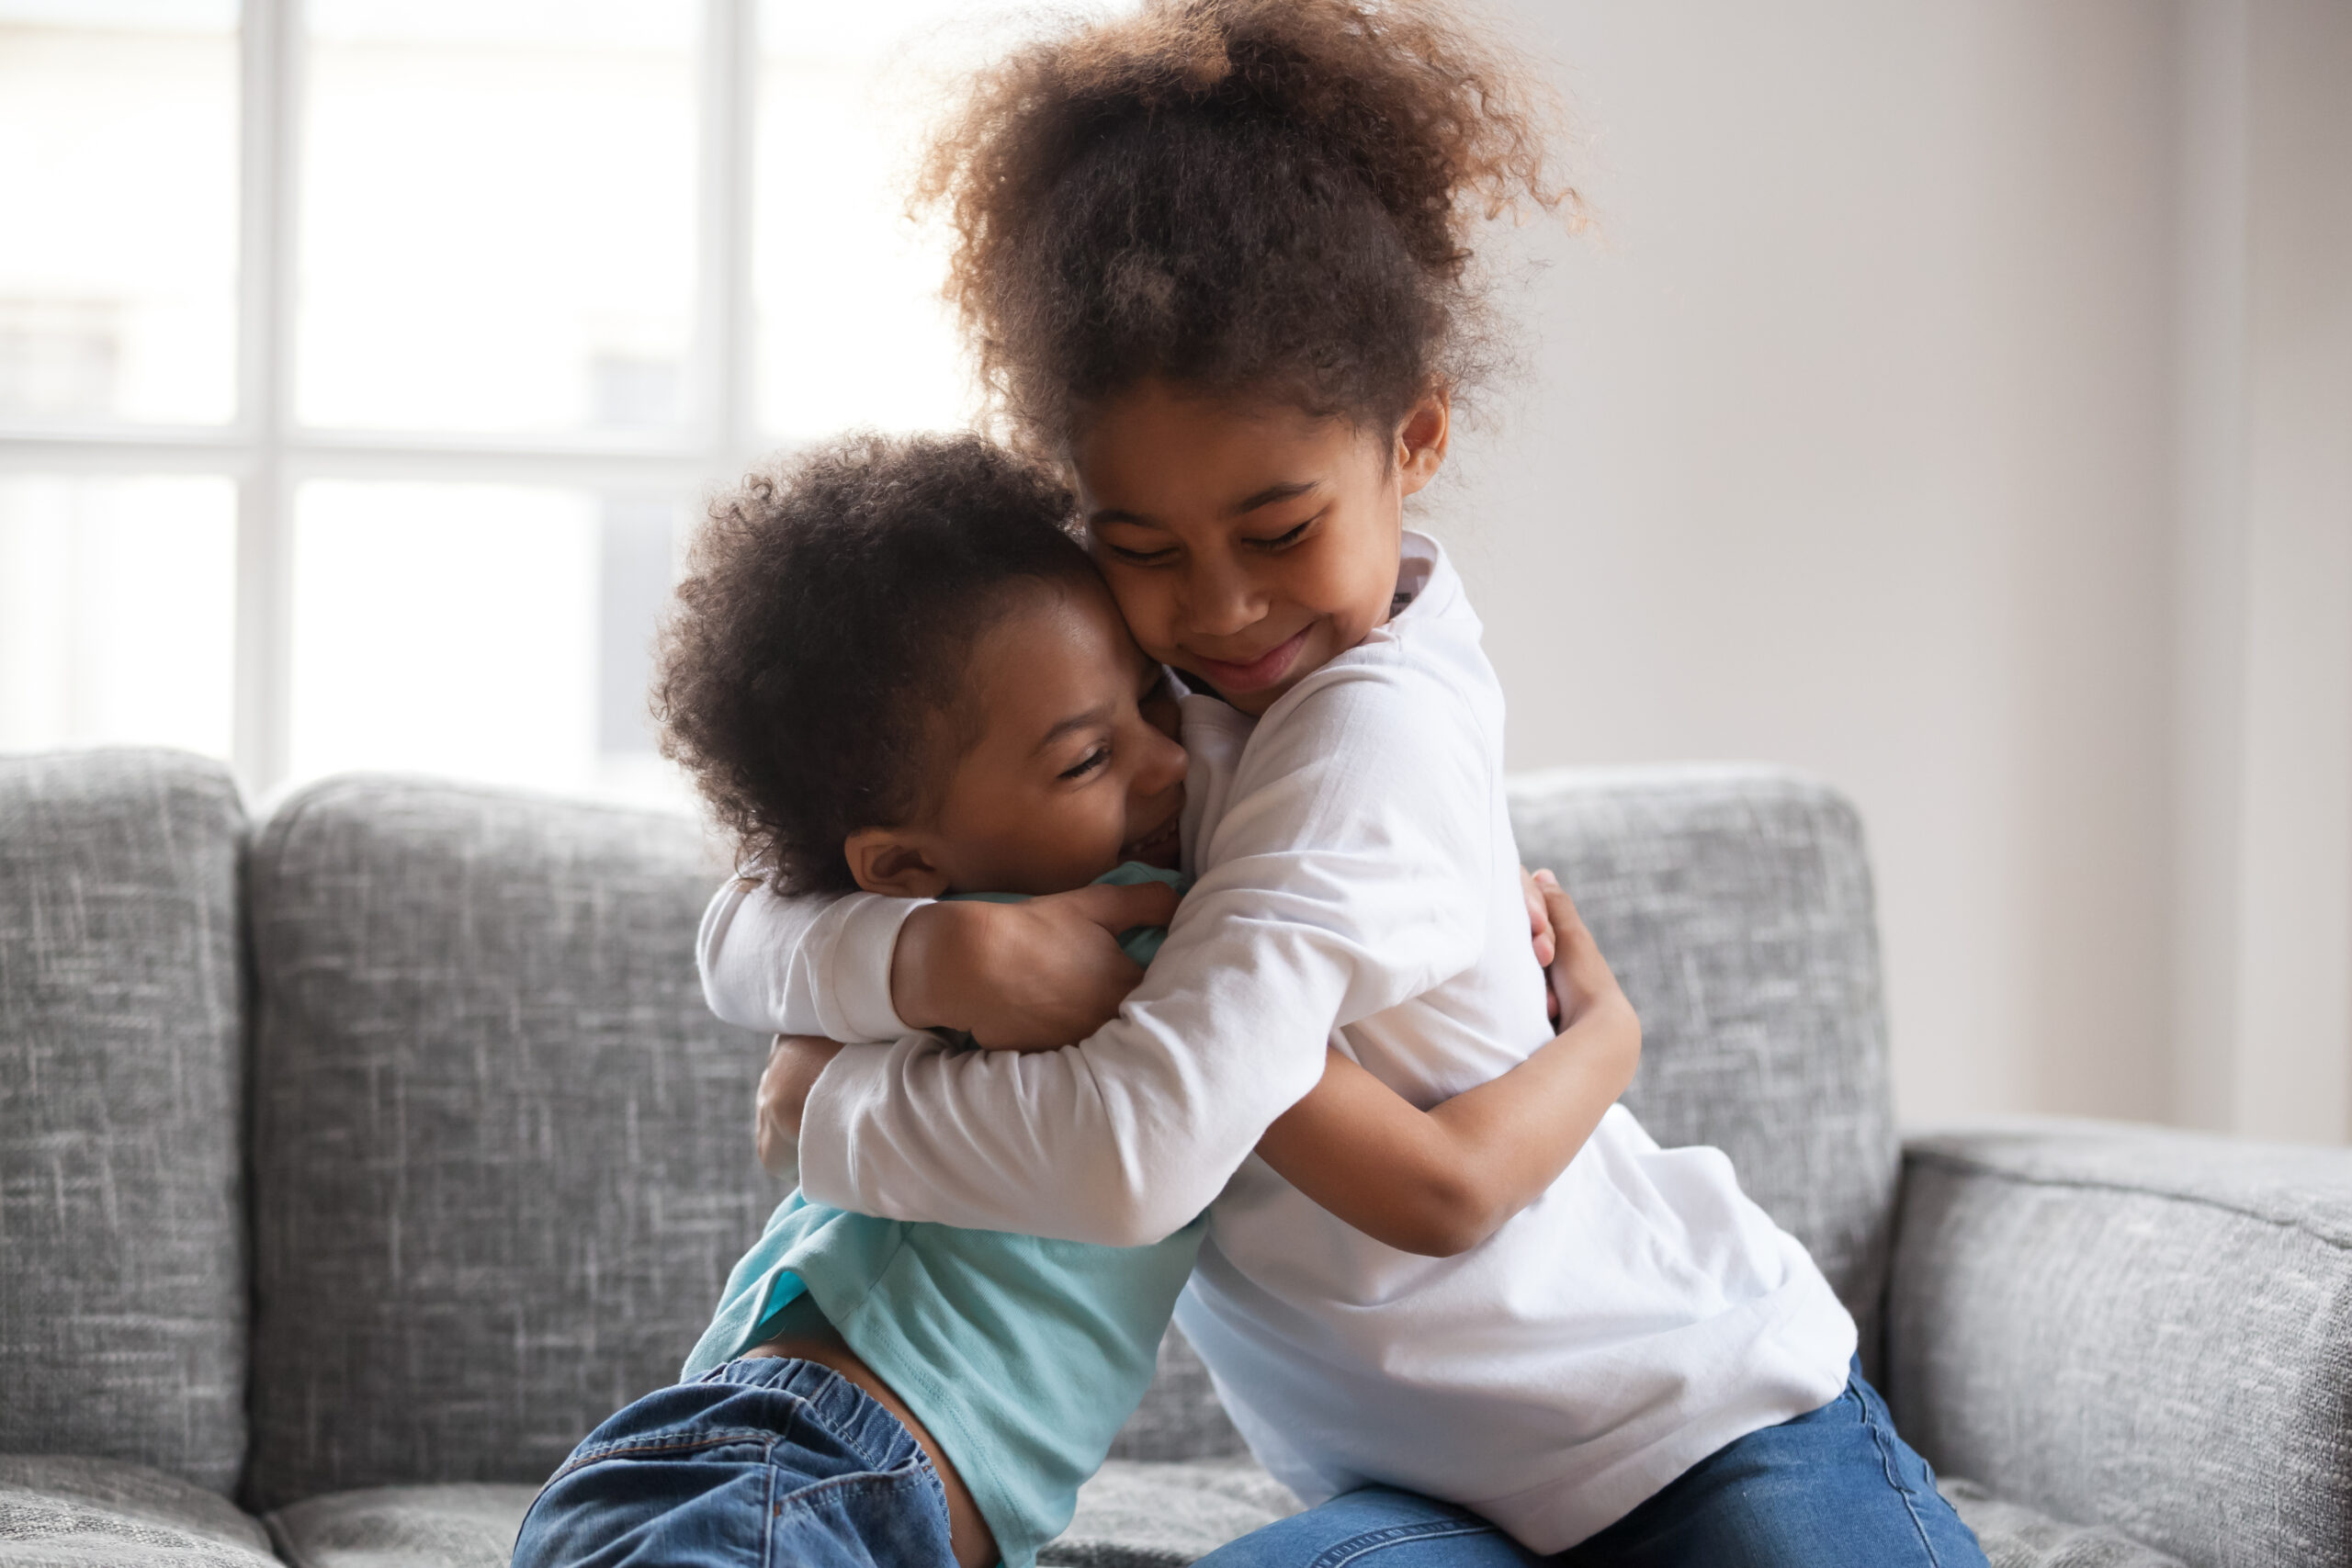 Two young children hugging each other on a couch.